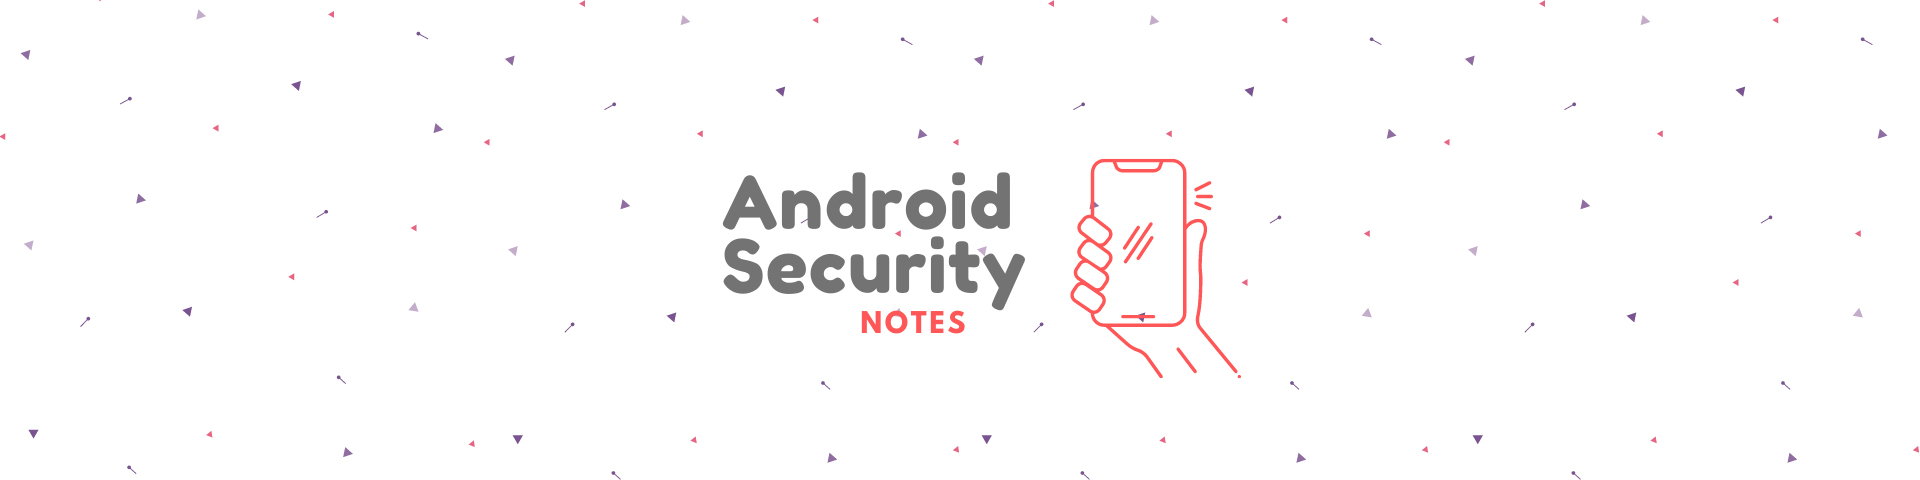 Android Security Notes